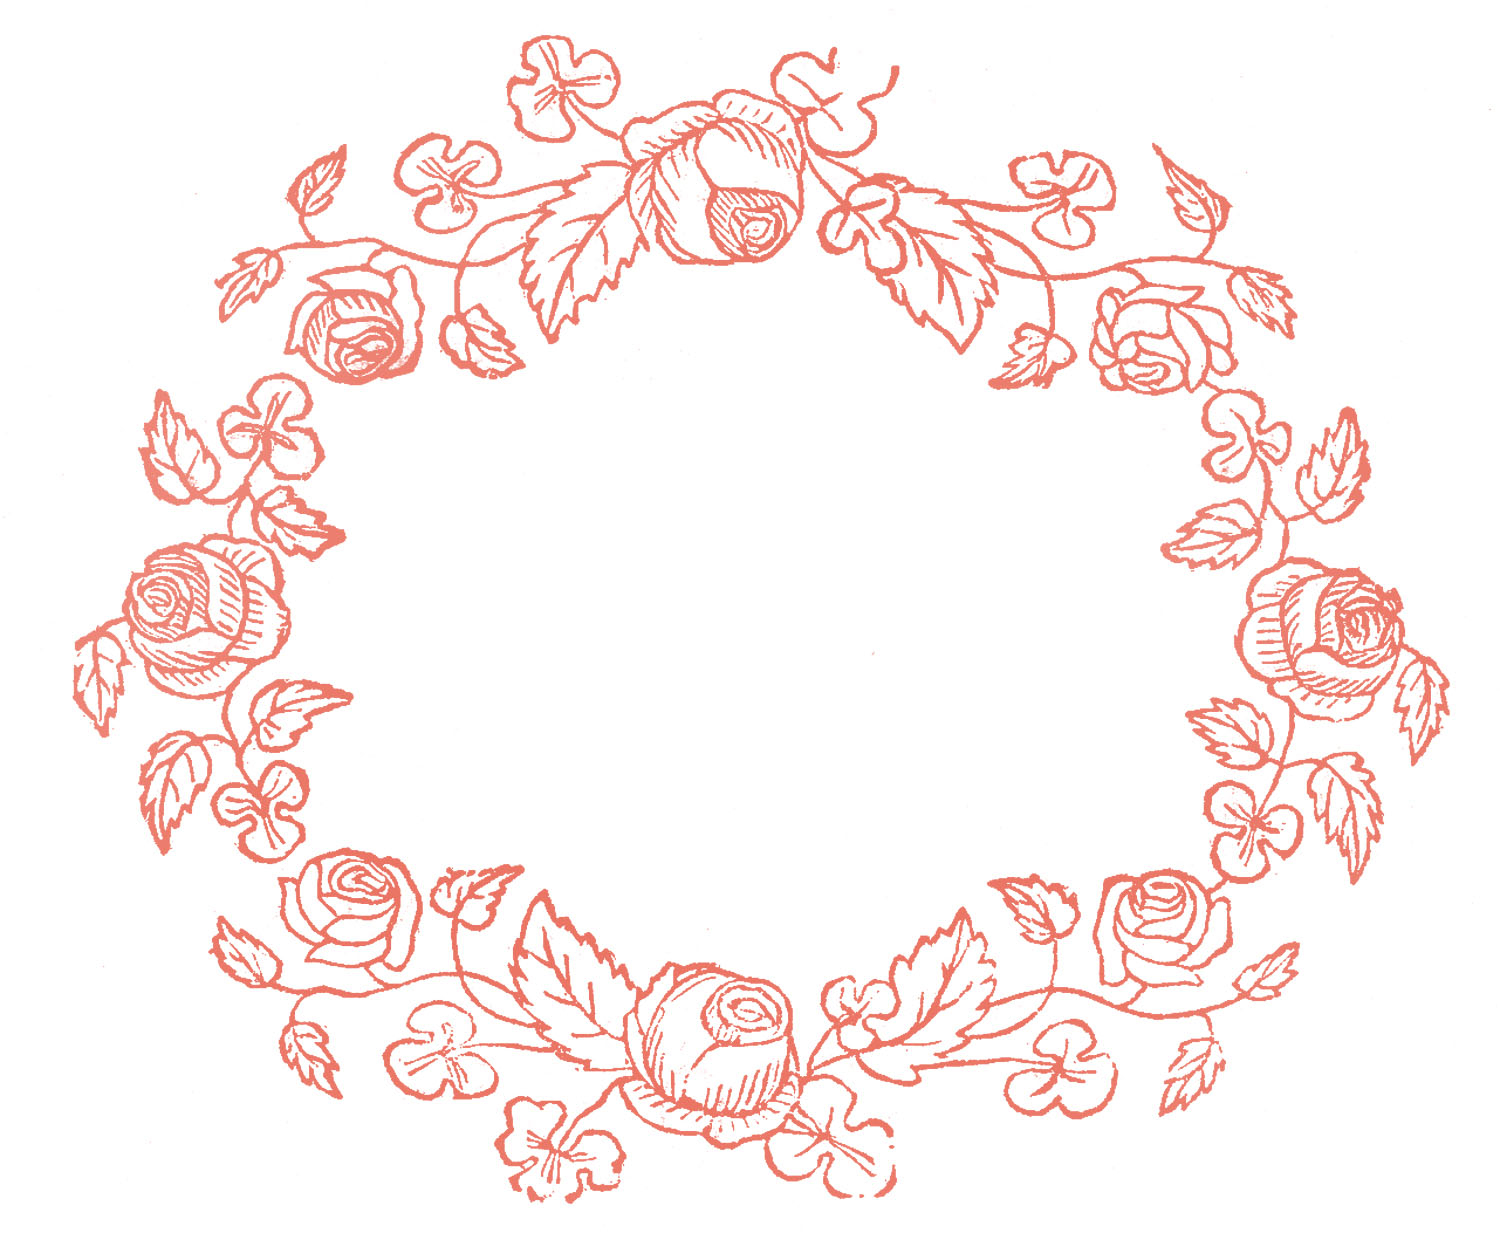 Rose Embroidery Pattern Royalty Free Images Rose Wreaths Embroidery Pattern The